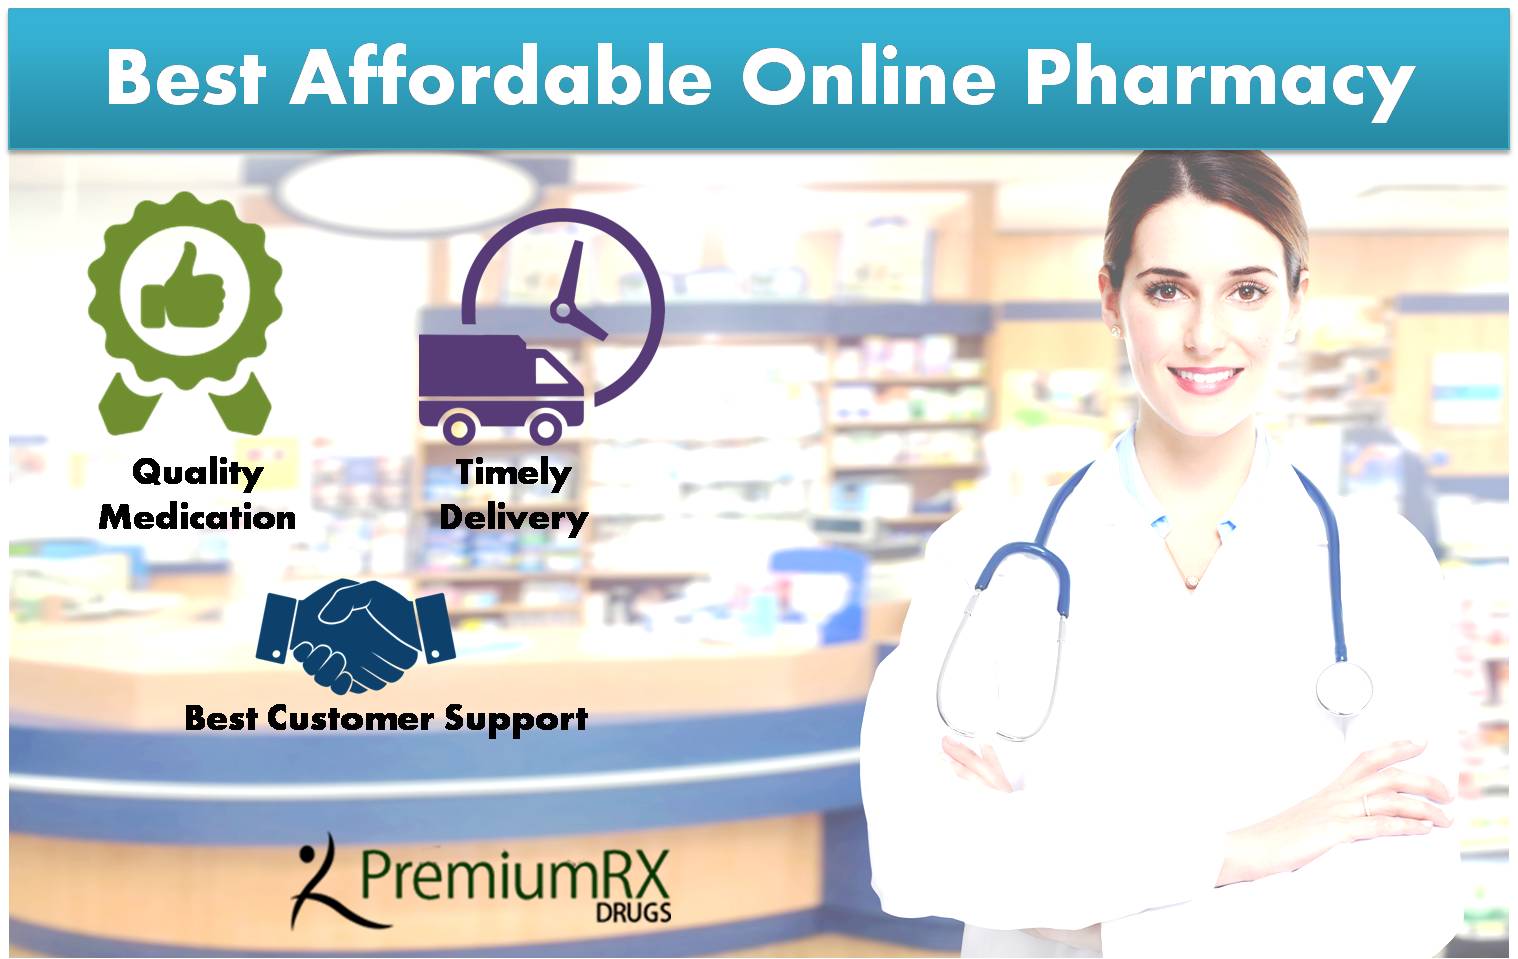 Best Affordable Online Pharmacy In The USA